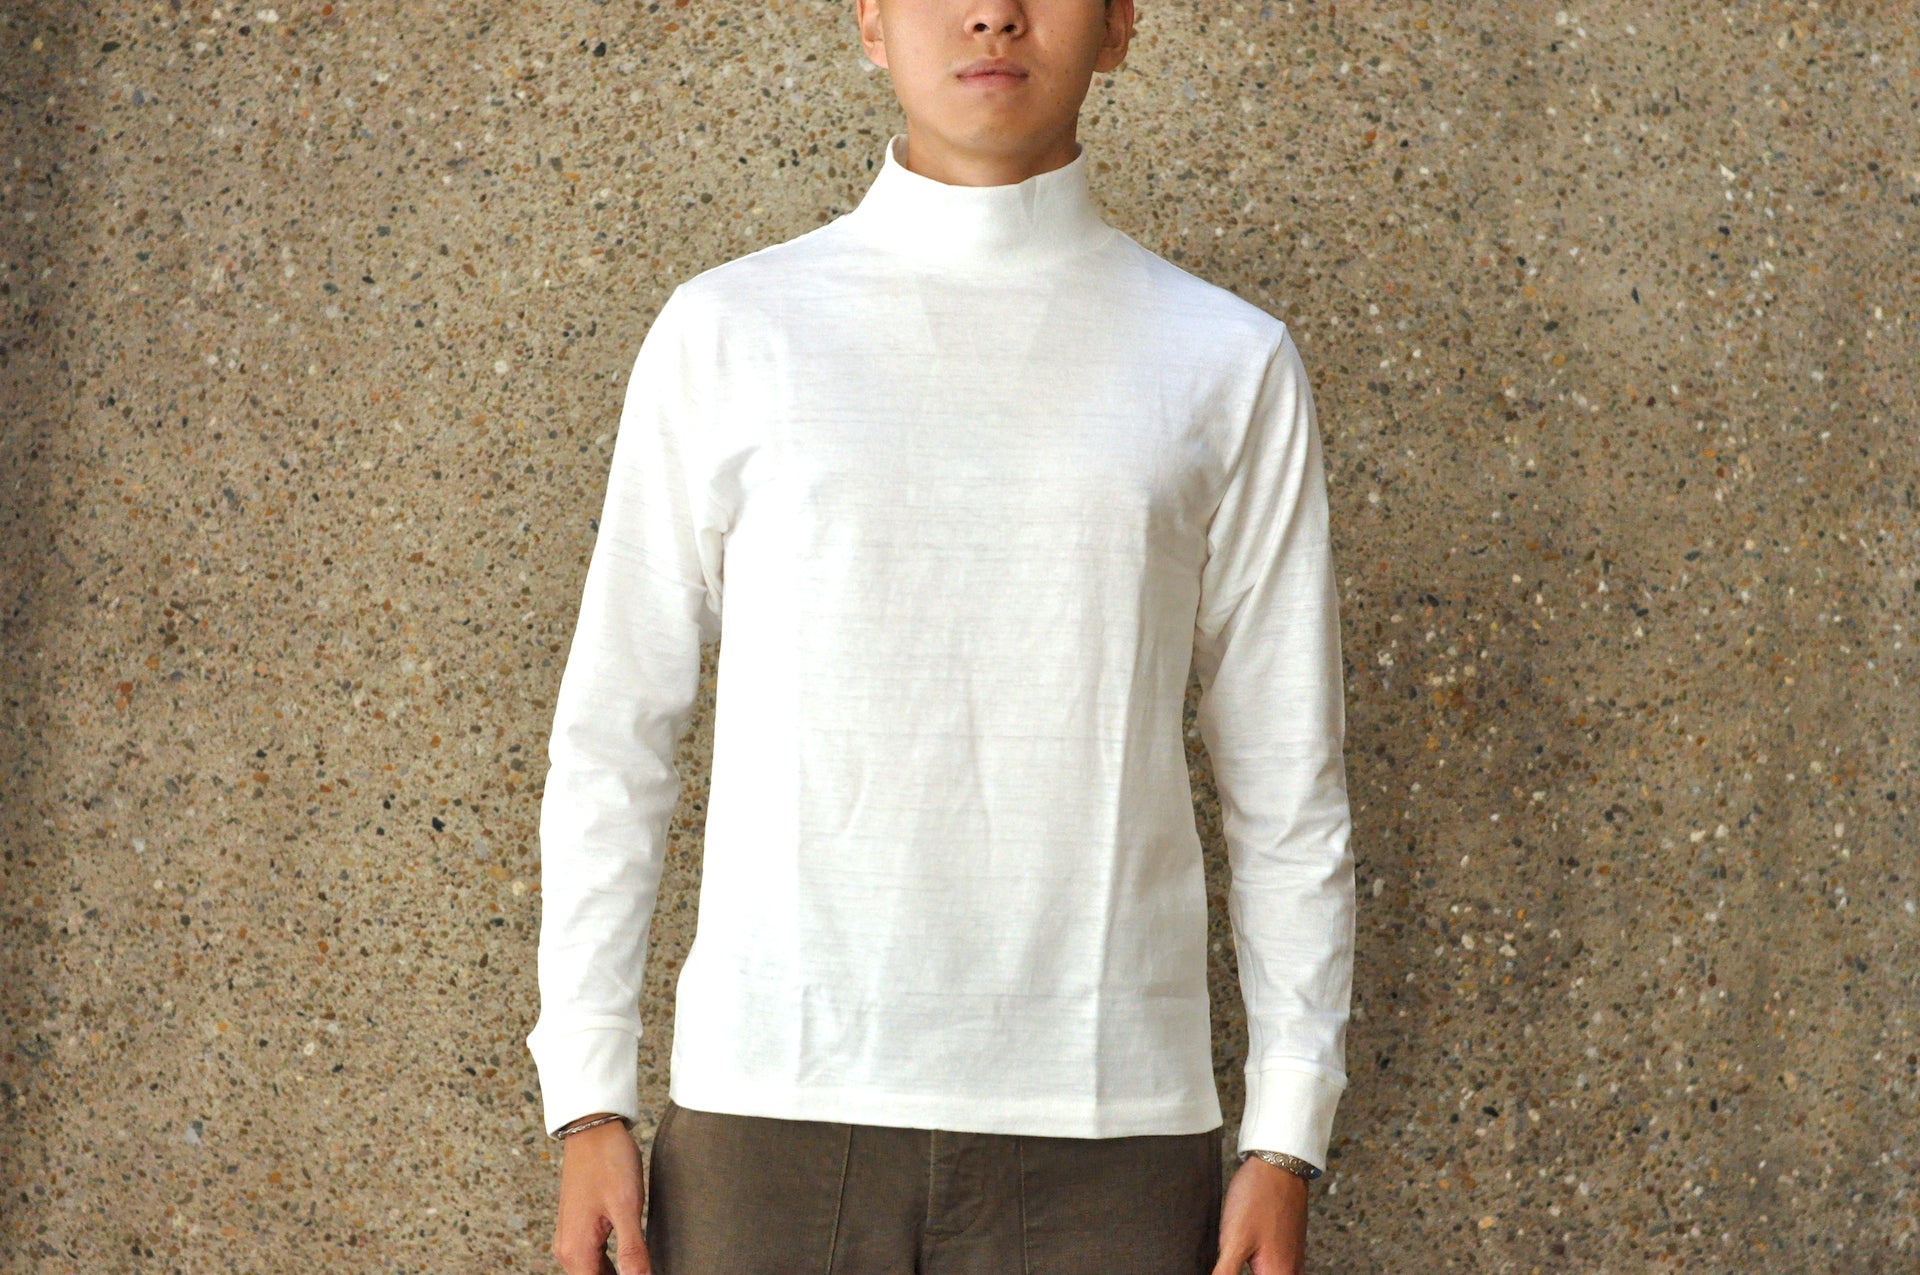 Warehouse 5.5oz "Bamboo Textured" L/S High Neck Tee (White)